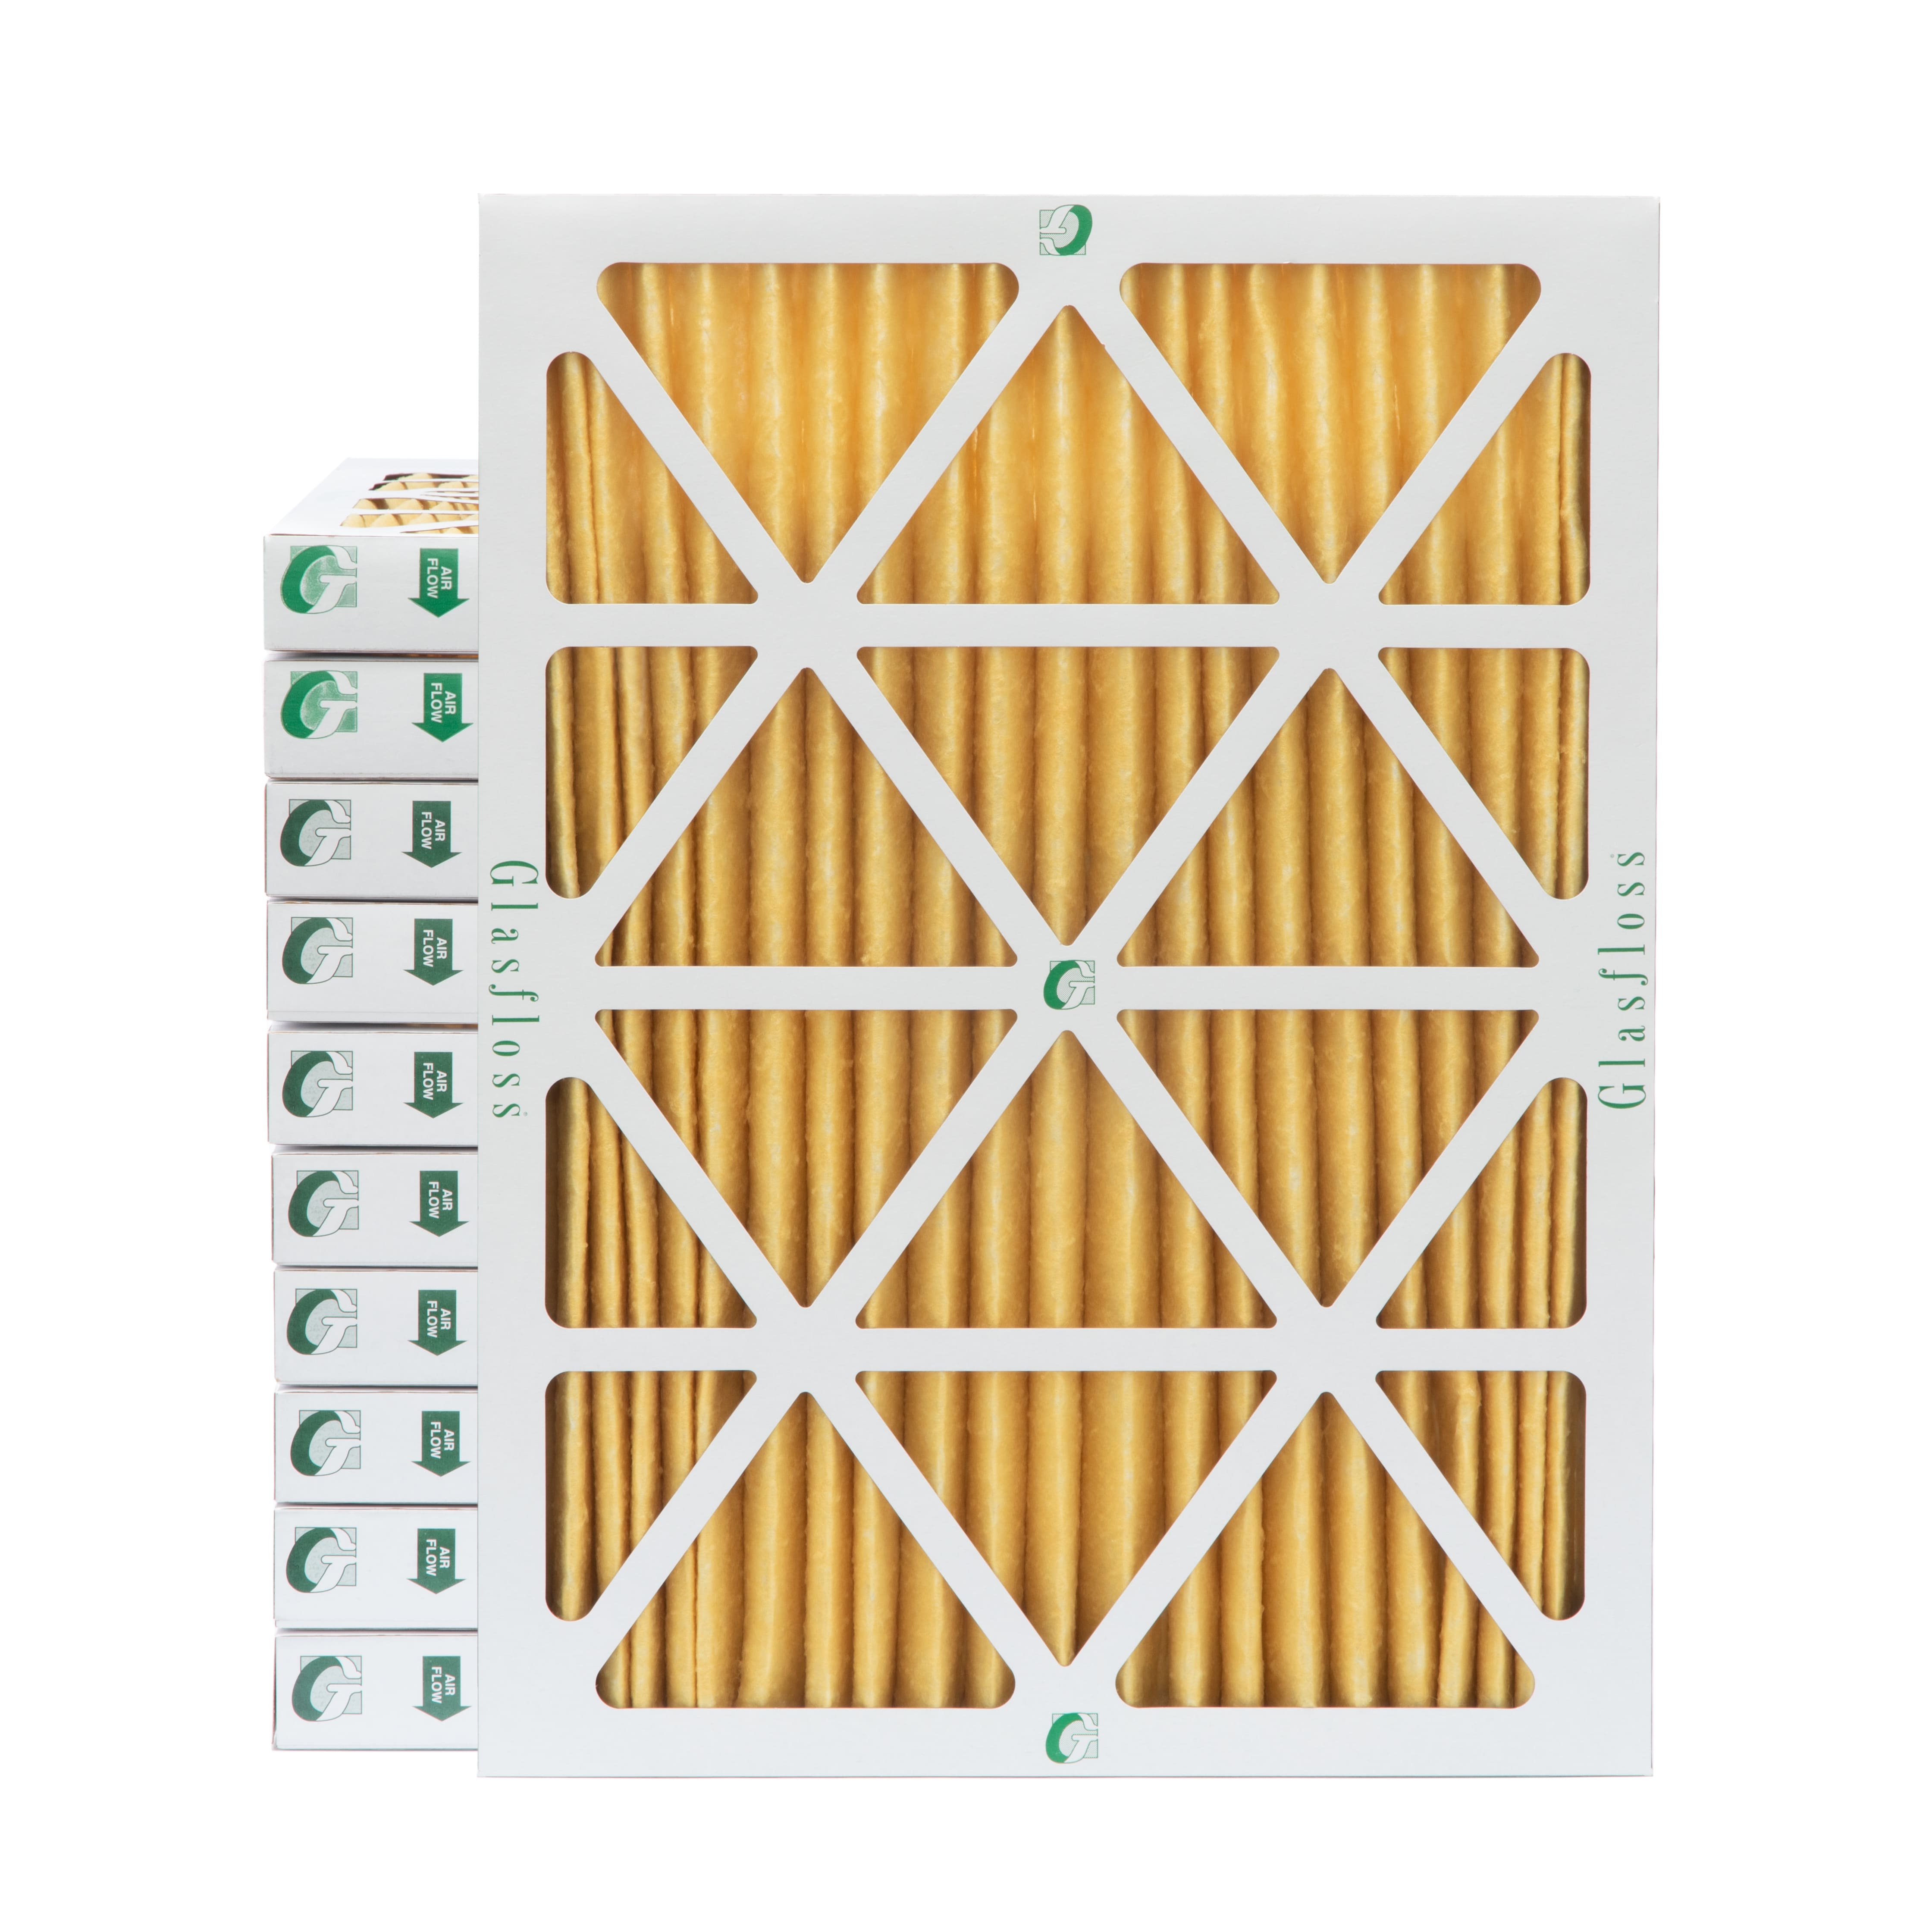 Glasfloss Filters 20x25x2 MERV 11 AC & Furnace filters (12 pack) by Glasfloss Industries